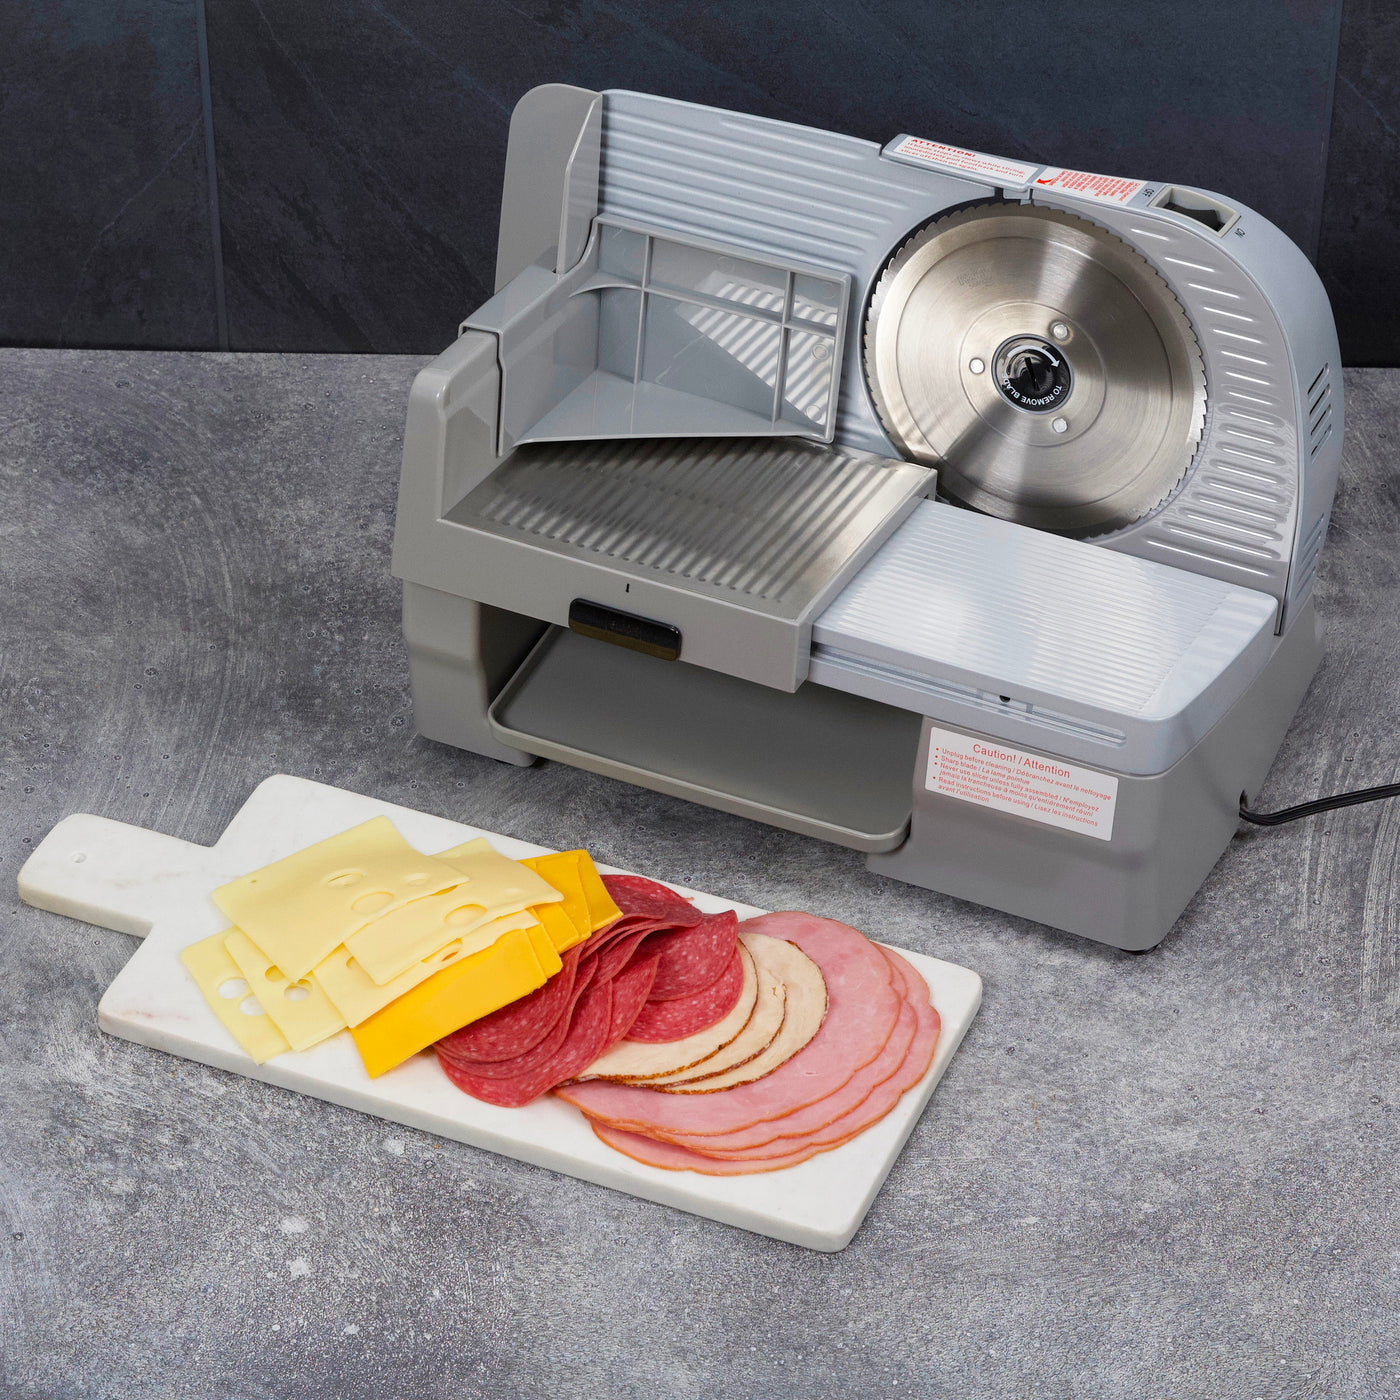 Chef'sChoice Electric Food Slicer Model 609A